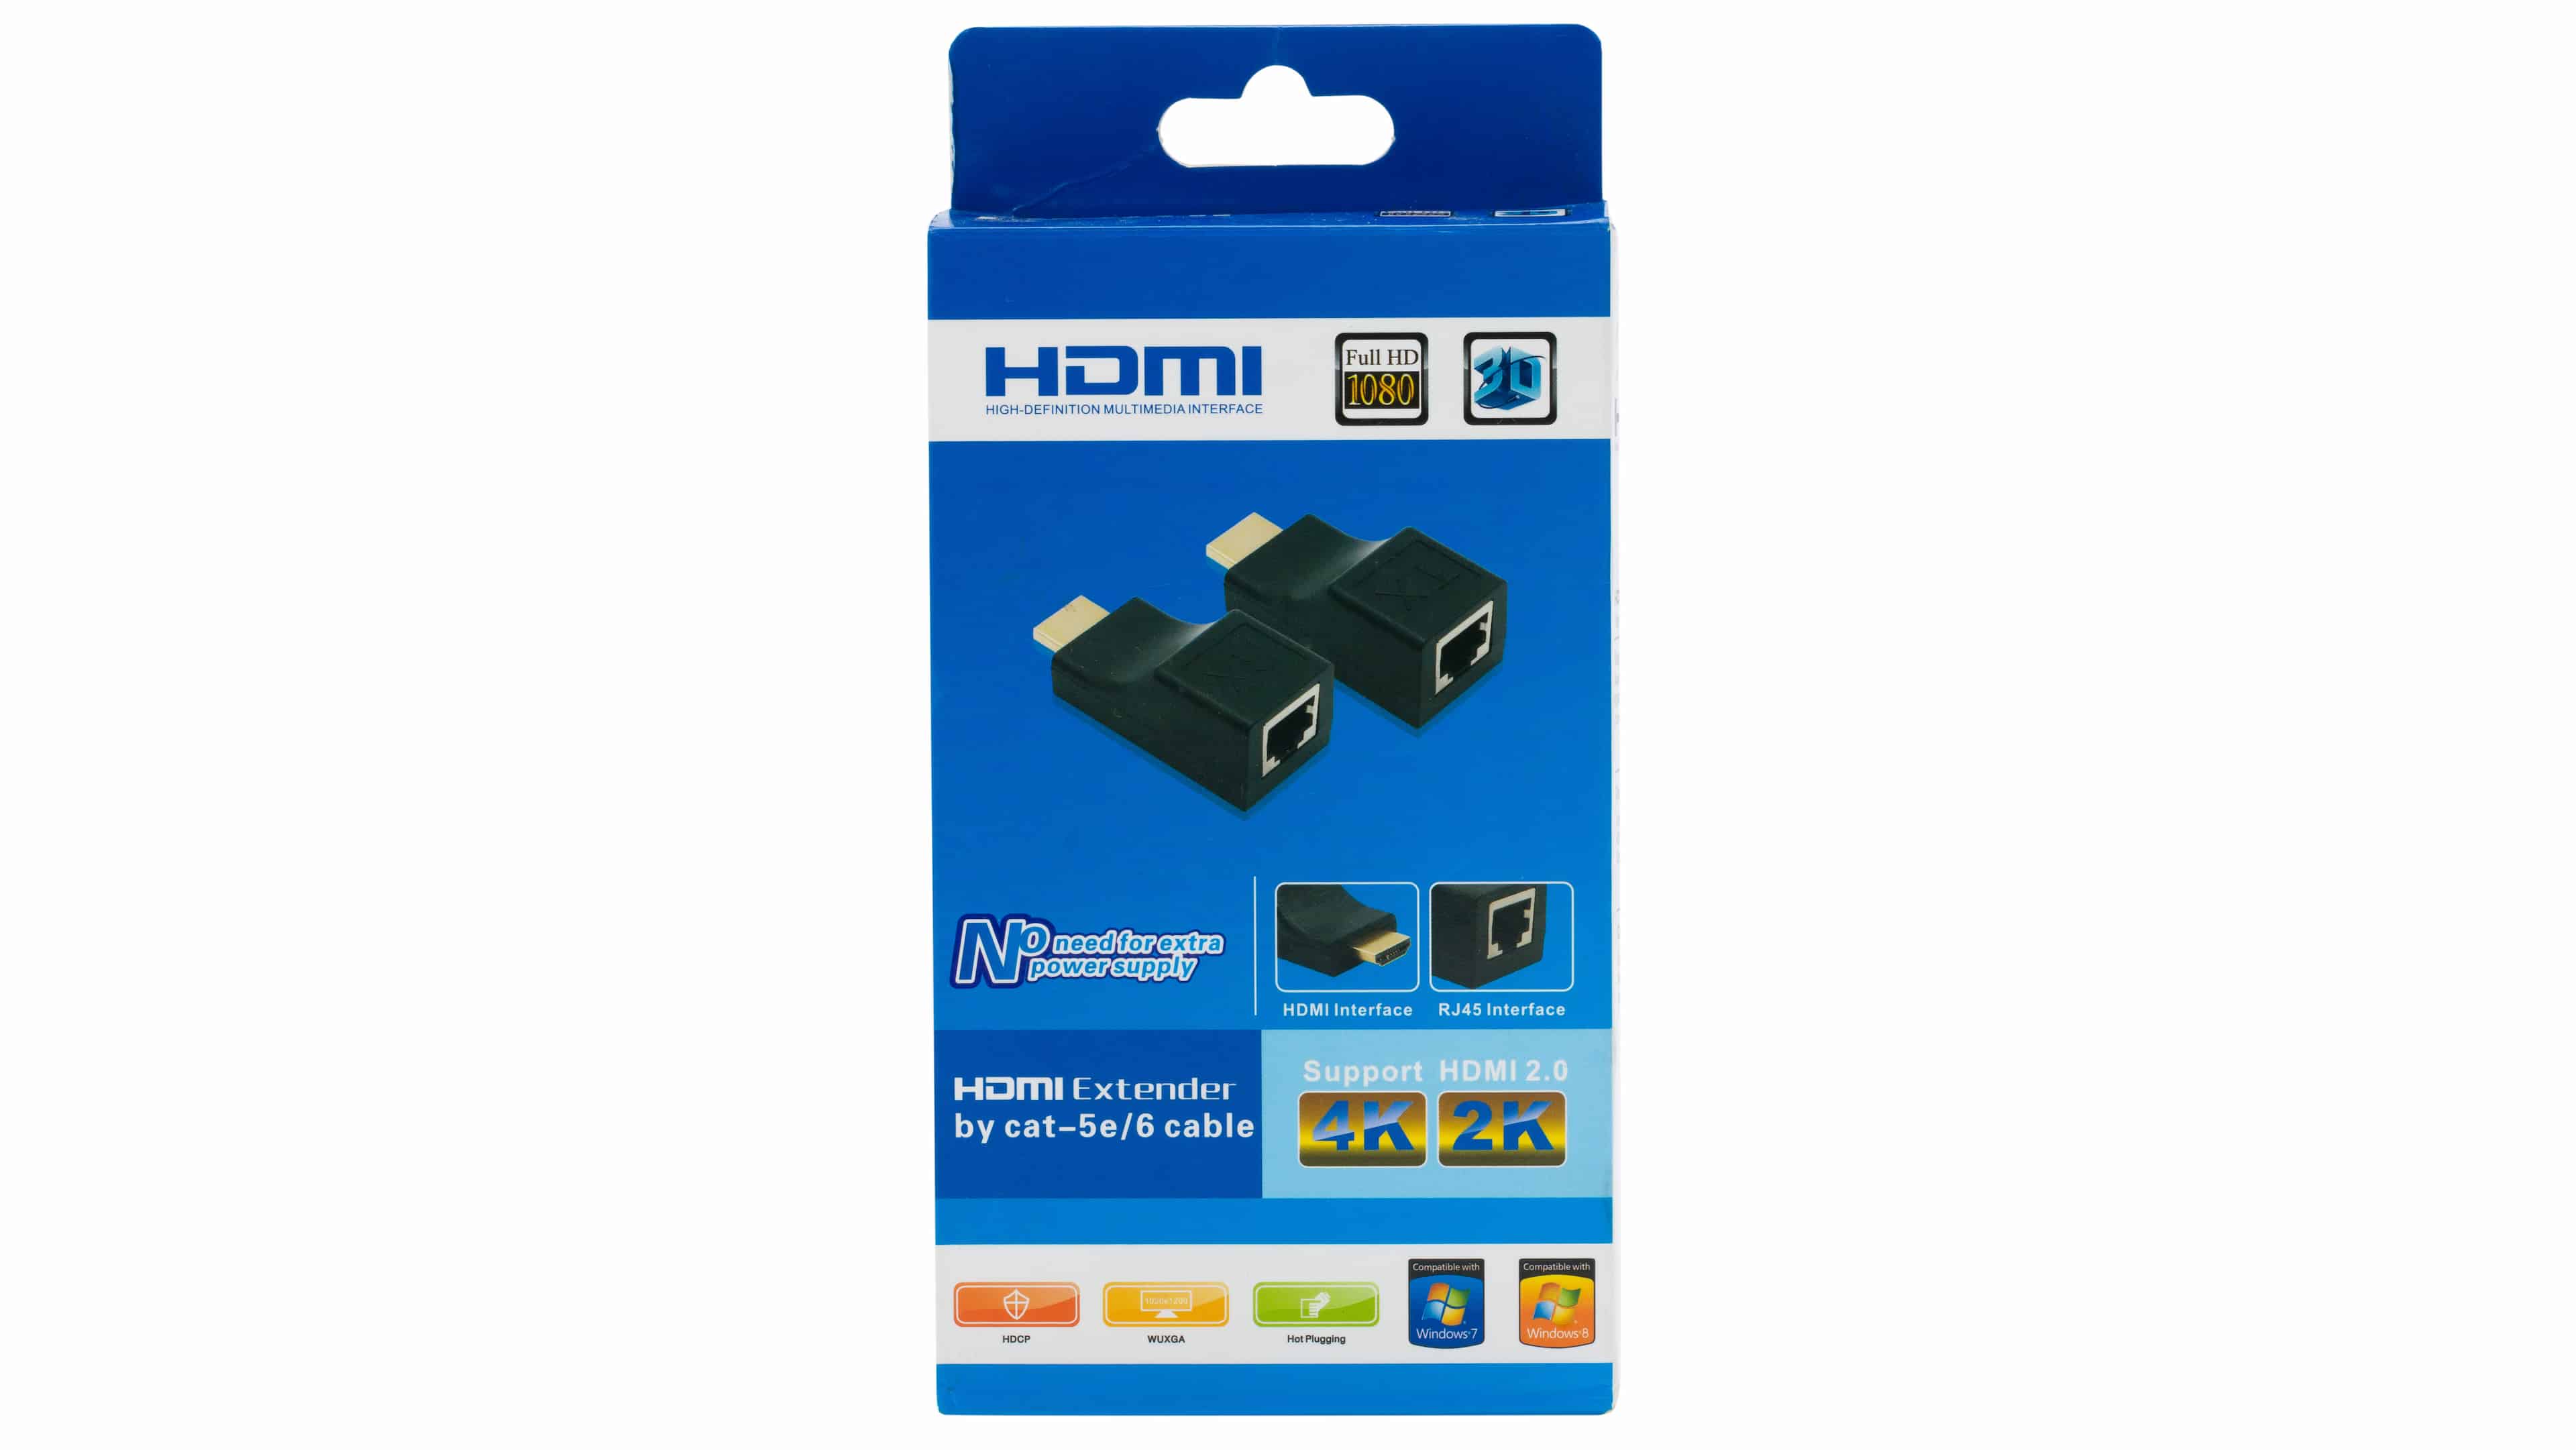 Generic-HDMI-Extender-by-Cat5-e_6-Cable-image_1